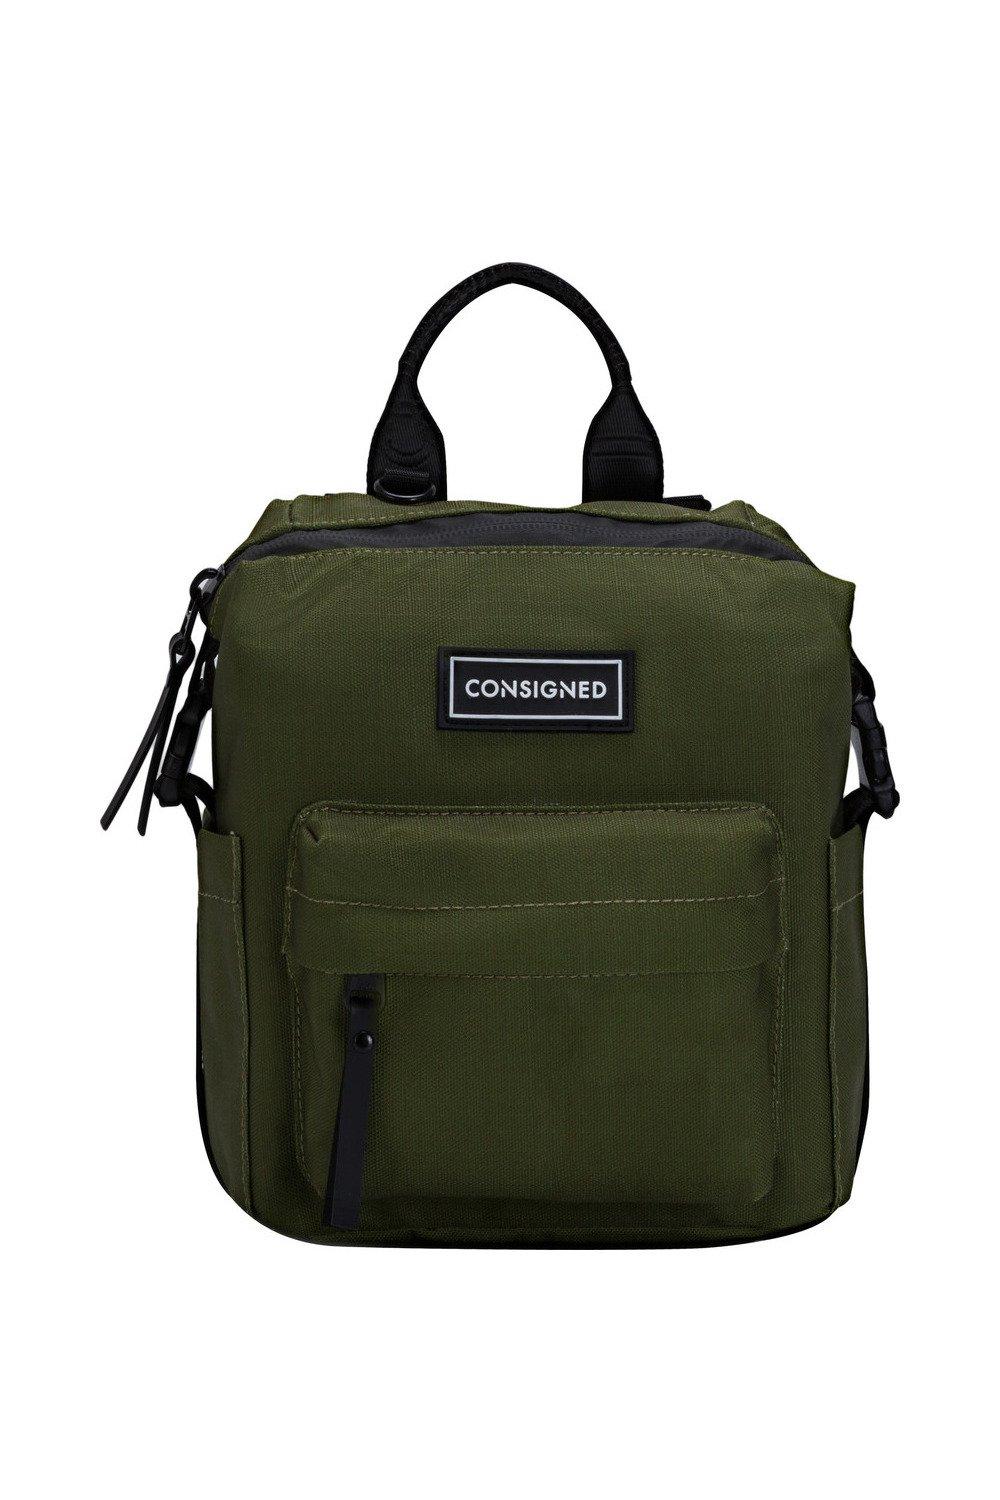 Bags & Purses | Lamont XS Front Pocket Backpack | Consigned